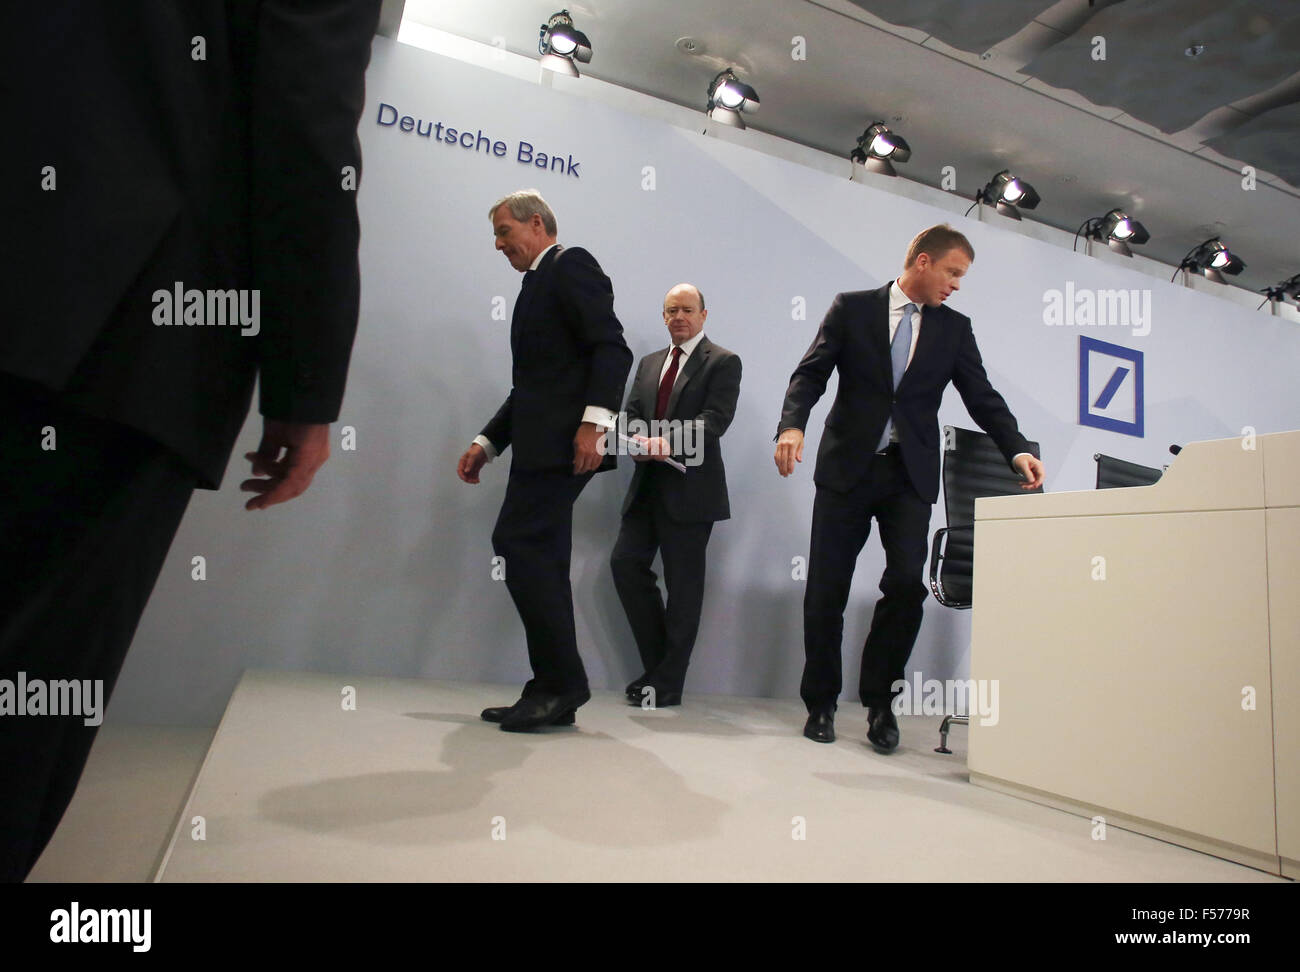 Christian Sewing (R-L), chief of the private and business client sector at the bank, and Juergen Fitschen and John Cryan, co-CEOS of Deutsche Bank, leave the podium after a press conference at the bank headquarters in Frankfurt am Main, Germany, 29 October 2015. The bank is presenting details on 'Strategy 2020.' Photo: FREDRIK VON ERICHSEN/dpa Stock Photo